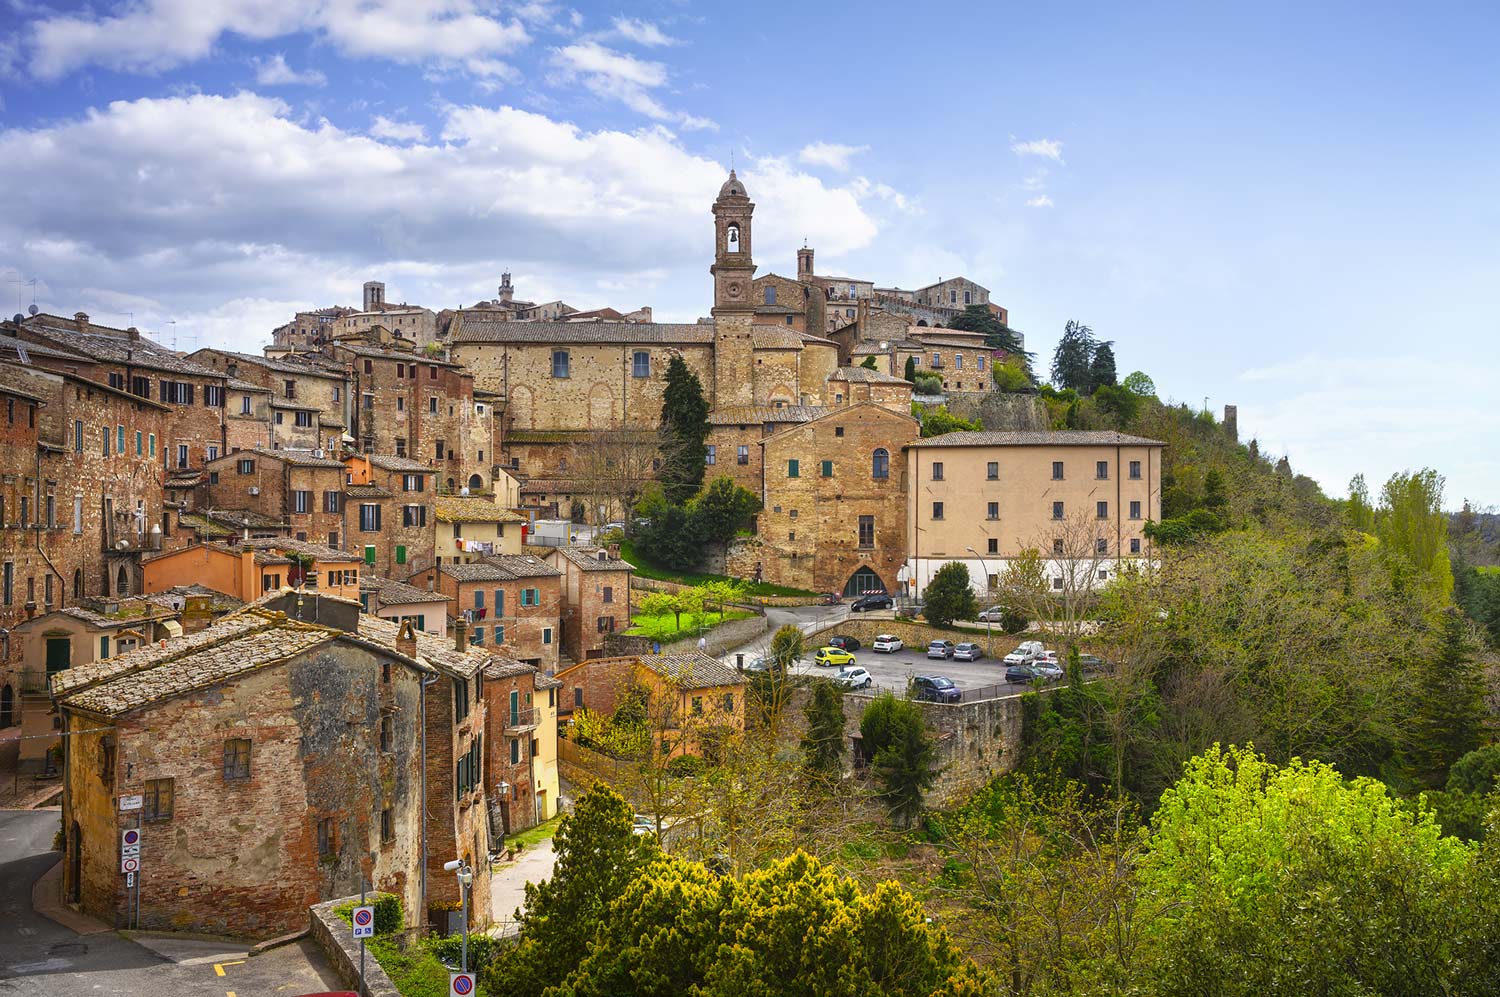 A view of the city of mentepulciano in Tuscany